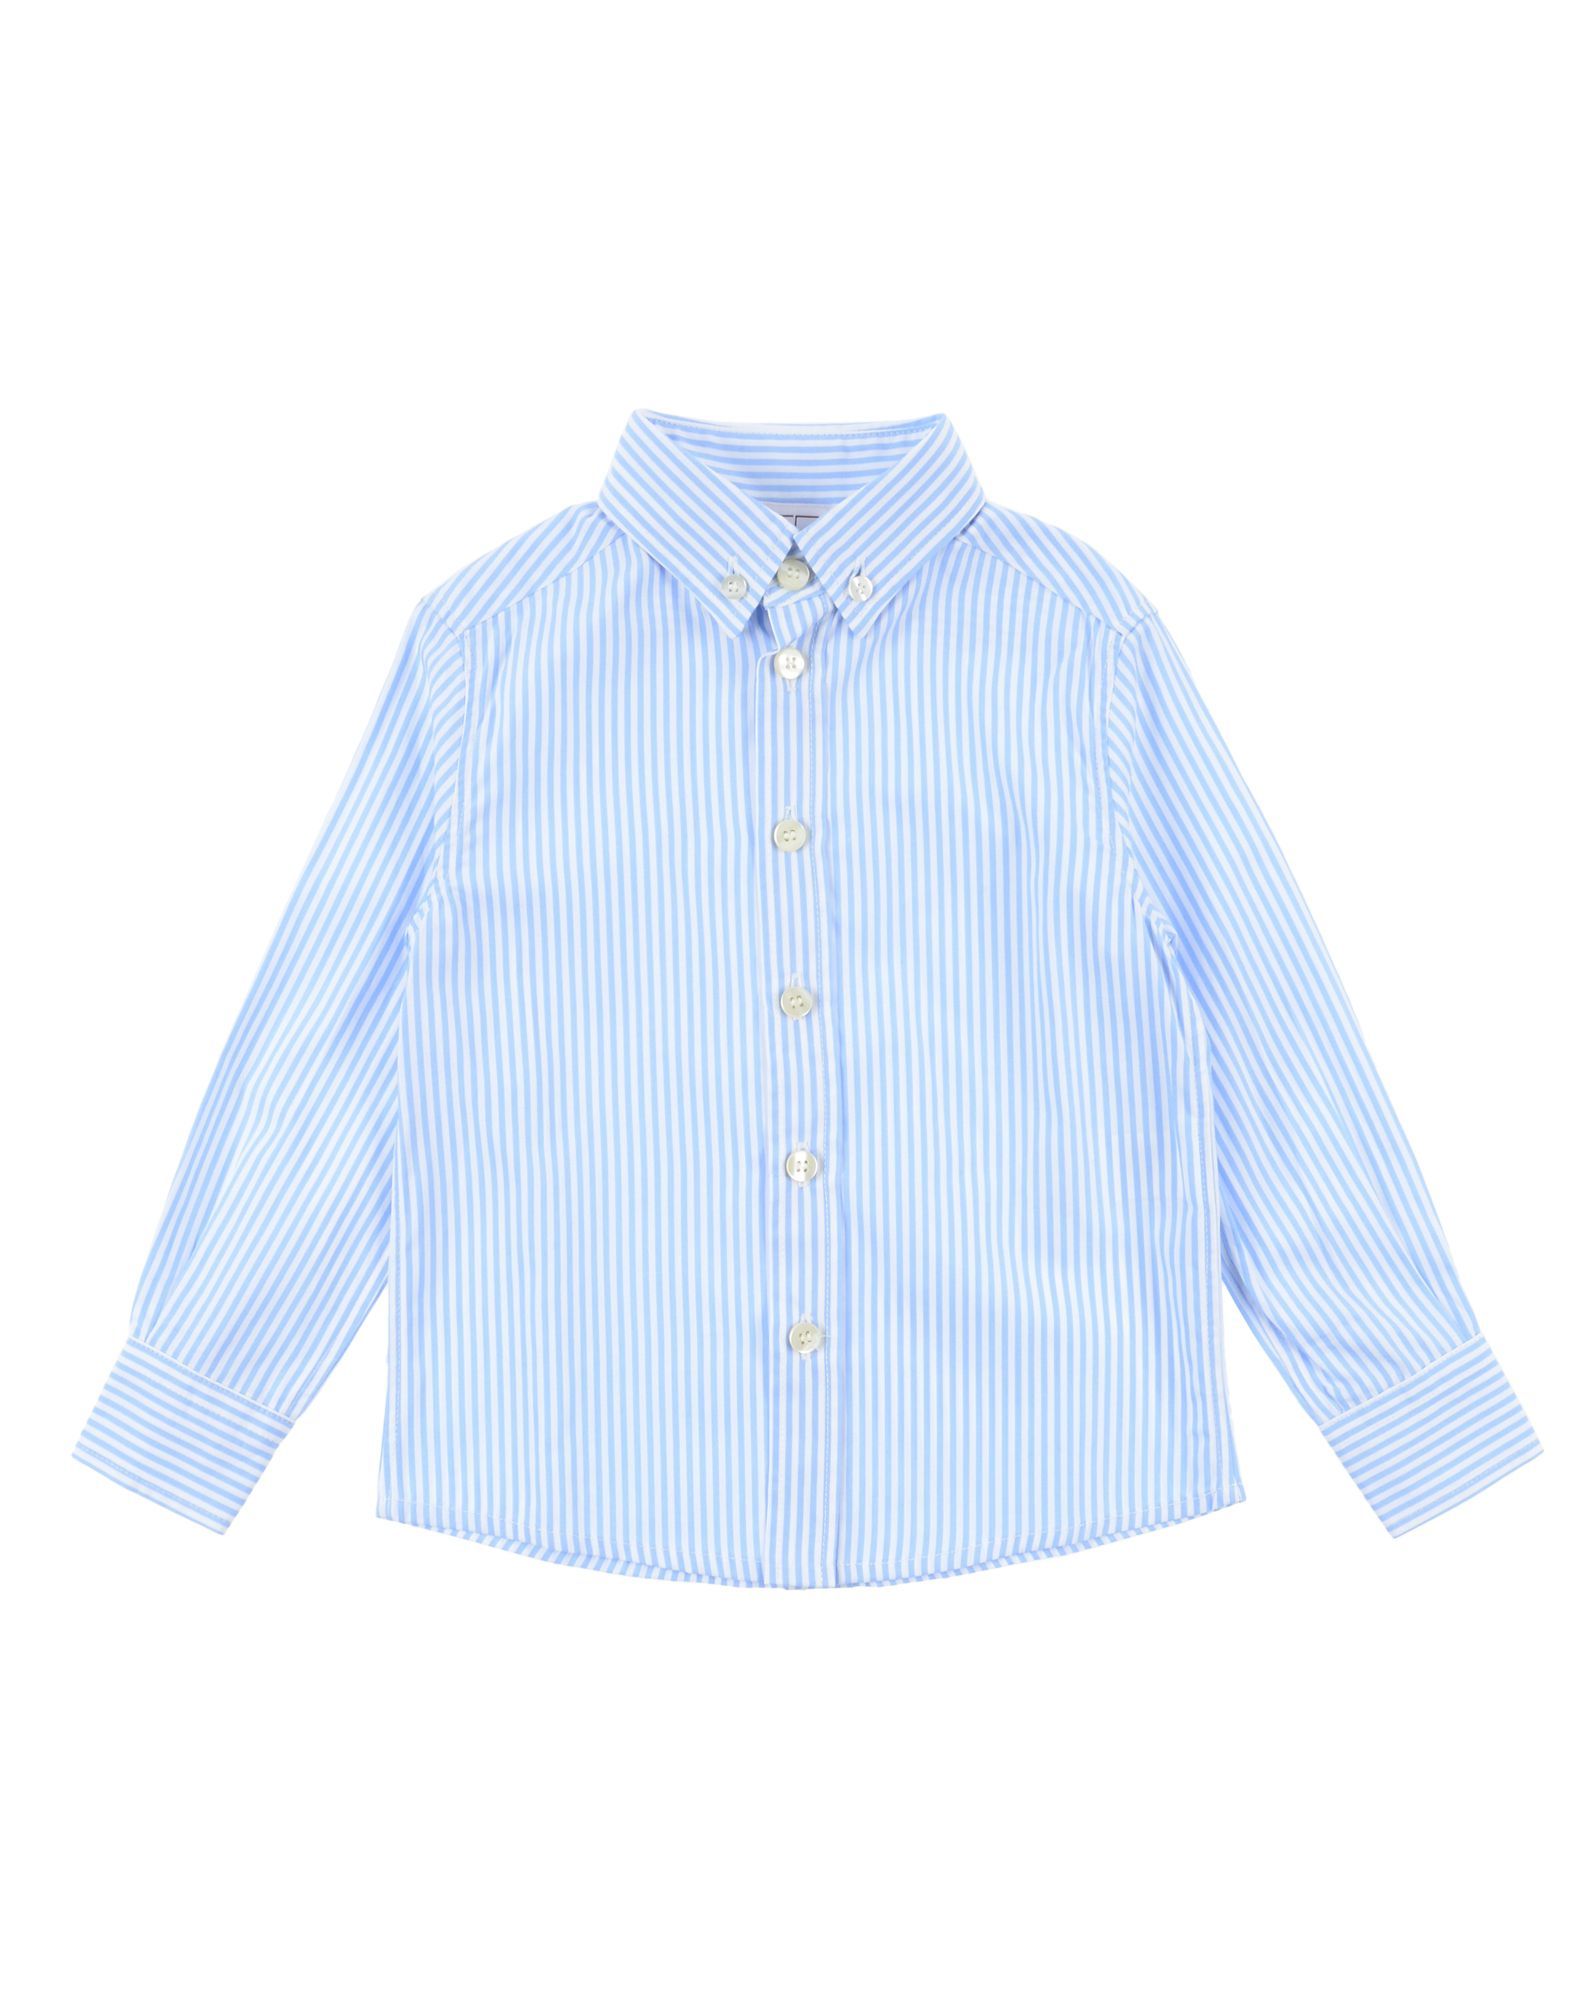 plain weave, no appliqués, stripes, lightweight knitted, front closure, button closing, long sleeves, buttoned cuffs, button-down collar, no pockets, wash at 30° c, dry cleanable, iron at 110° c max, do not bleach, do not tumble dry